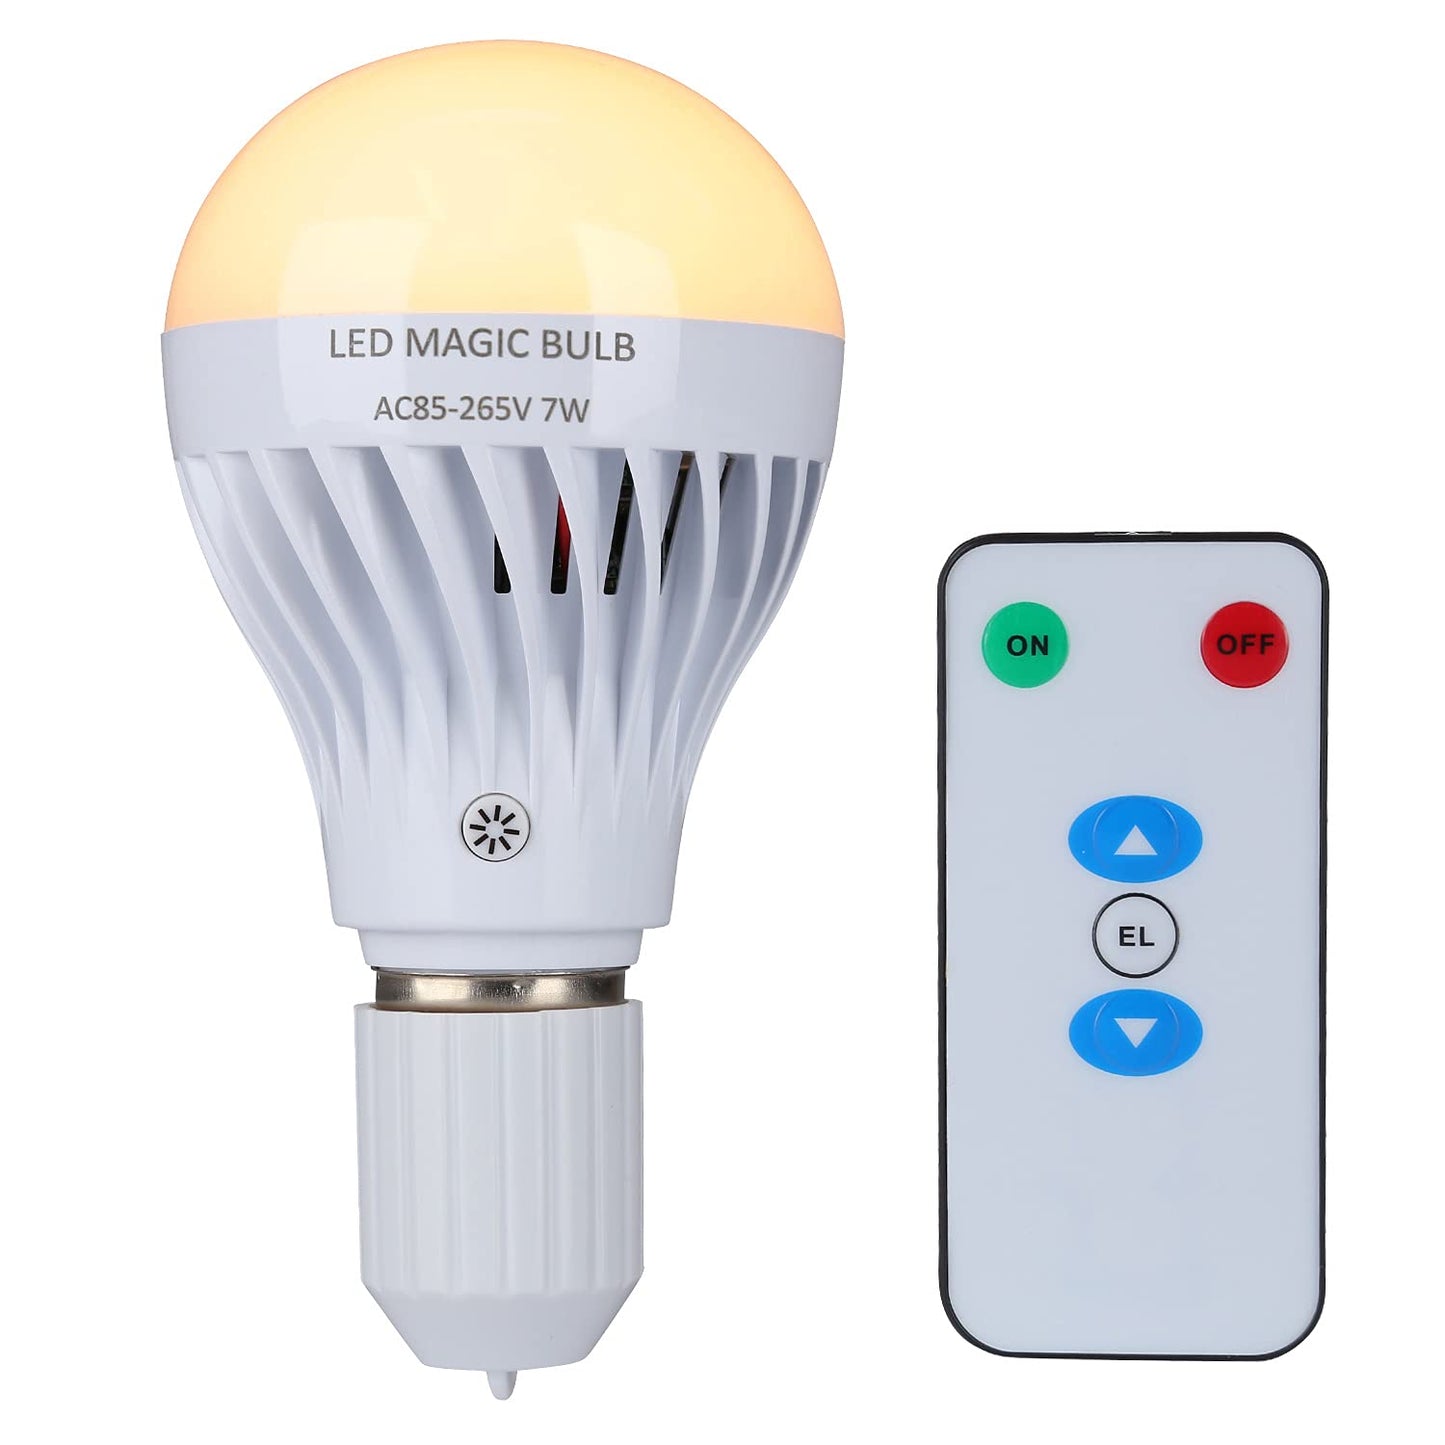 BSOD LED Magic Bulb, 7W Warm White Emergency Light with Remote Controller and Rechargeable Built-in Battery E26 Lamp for Home Indoor Power Outages Lighting (Warm White) - Like New